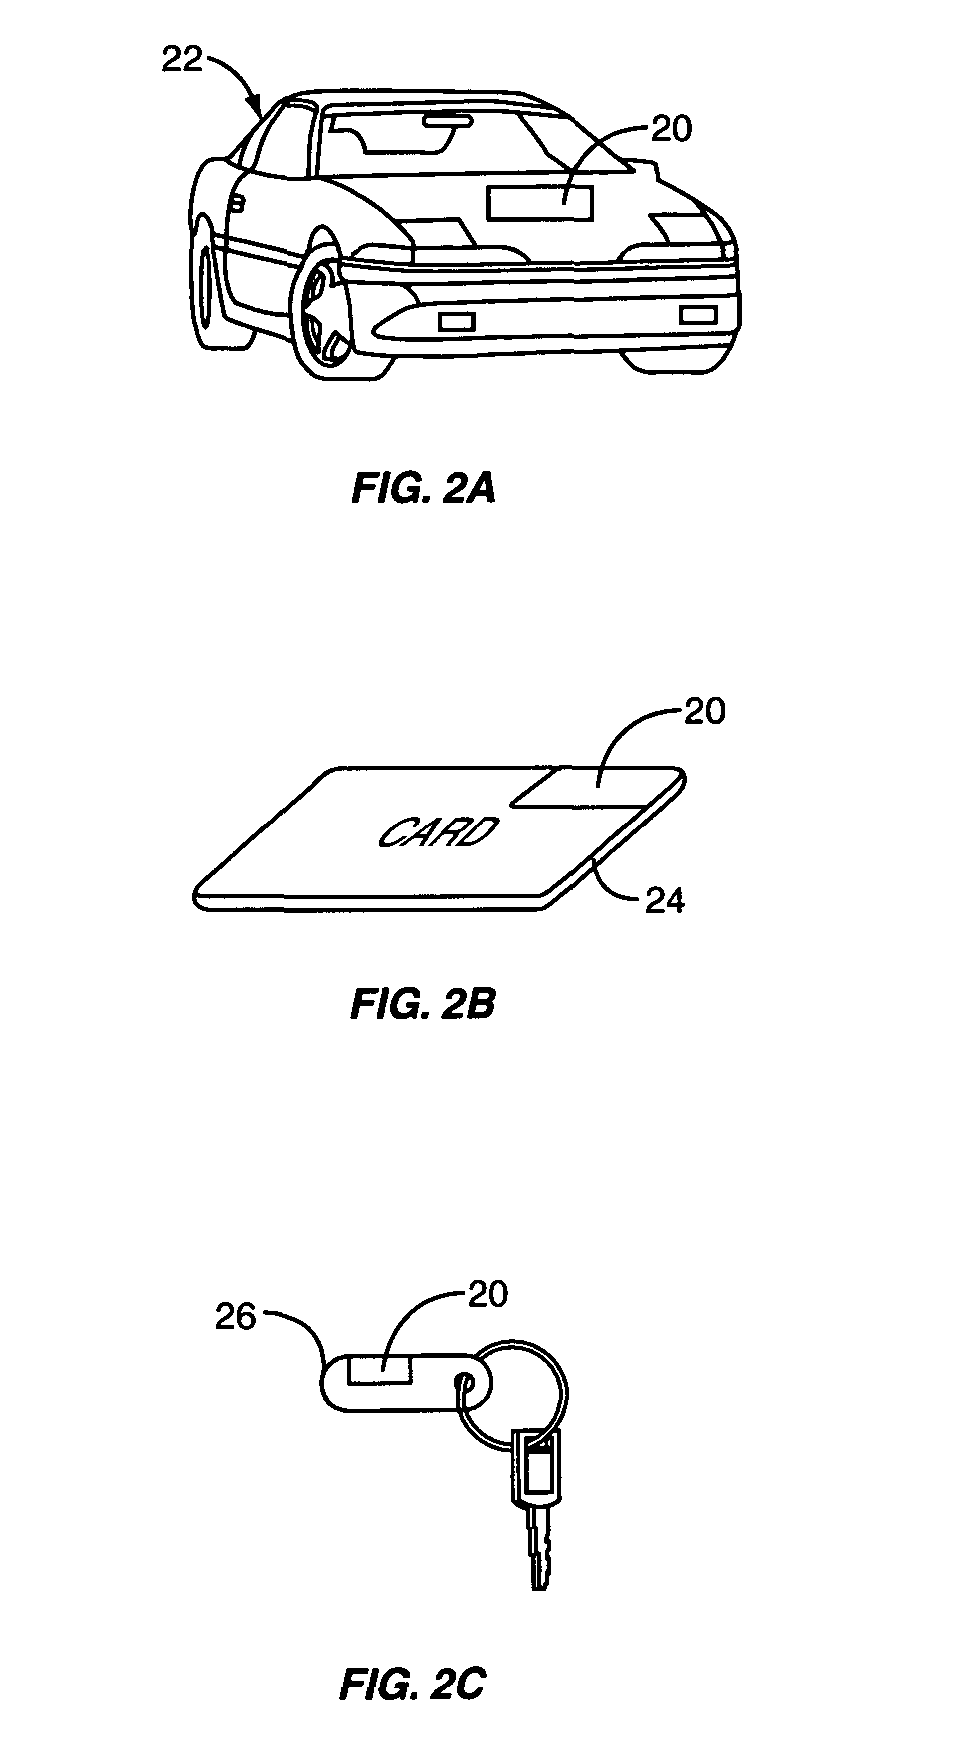 Remote payment account relational system and method for retail devices